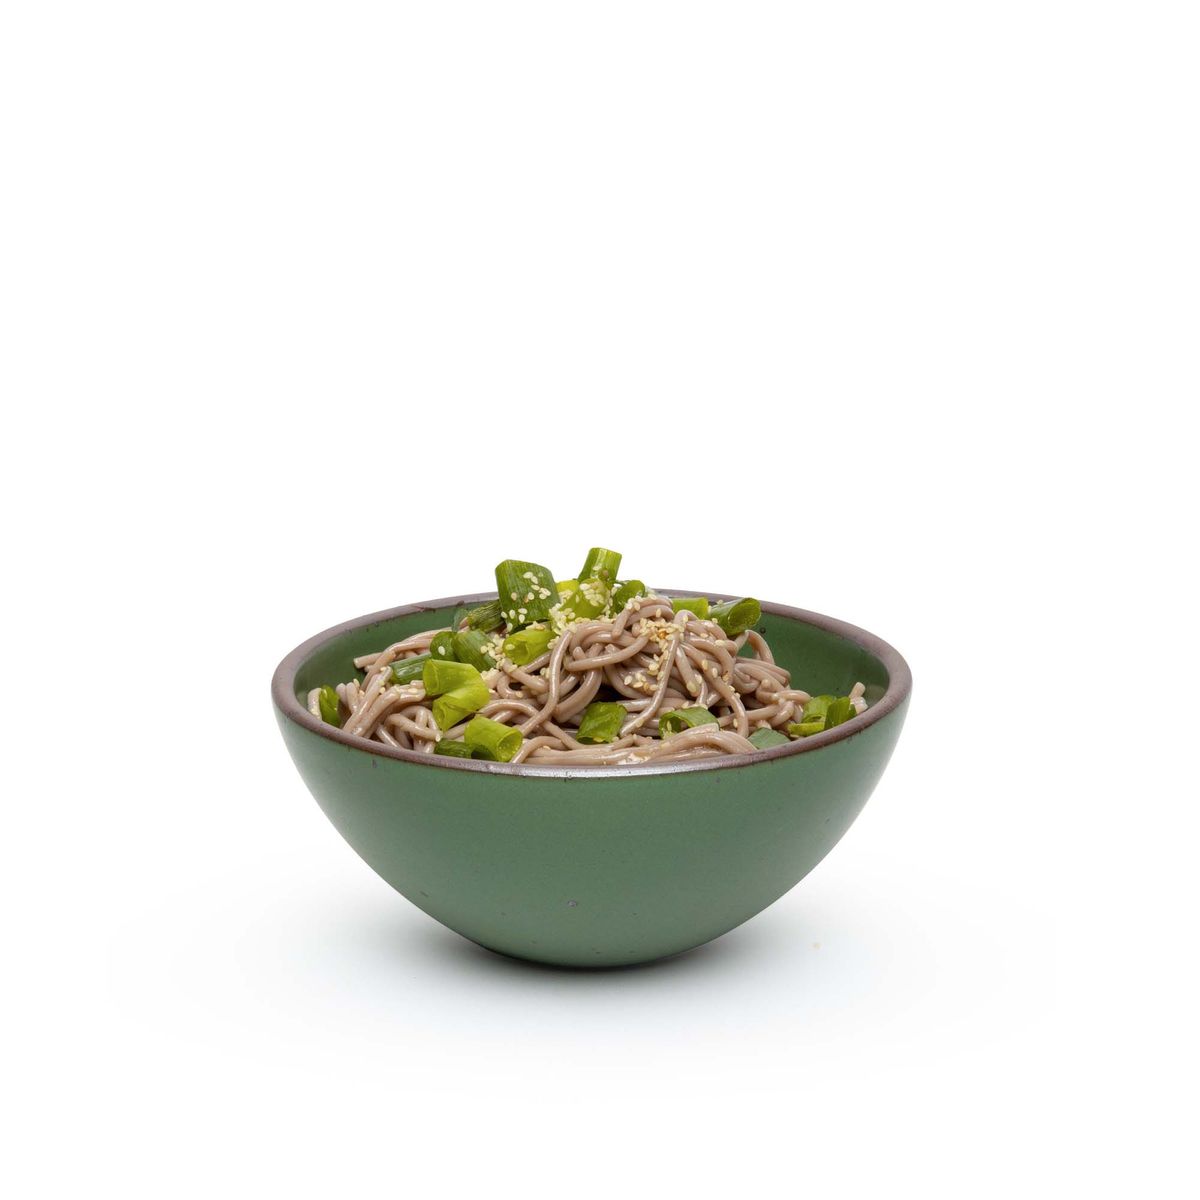 A medium rounded ceramic bowl in a deep, verdant green color featuring iron speckles and an unglazed rim, filled with noodles